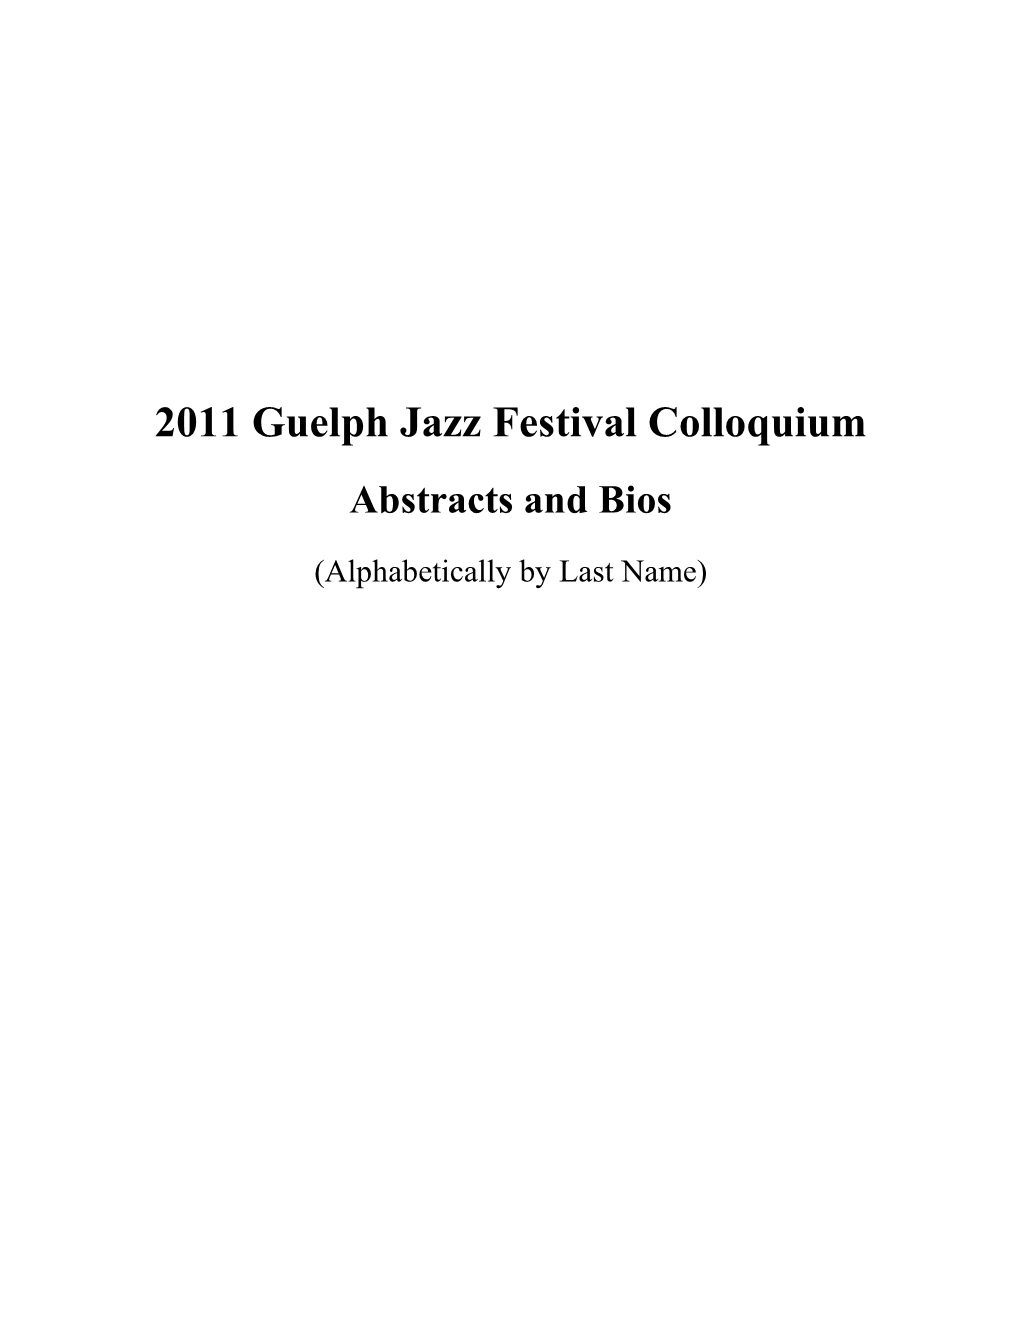 2011 GJFC Bios and Abstracts